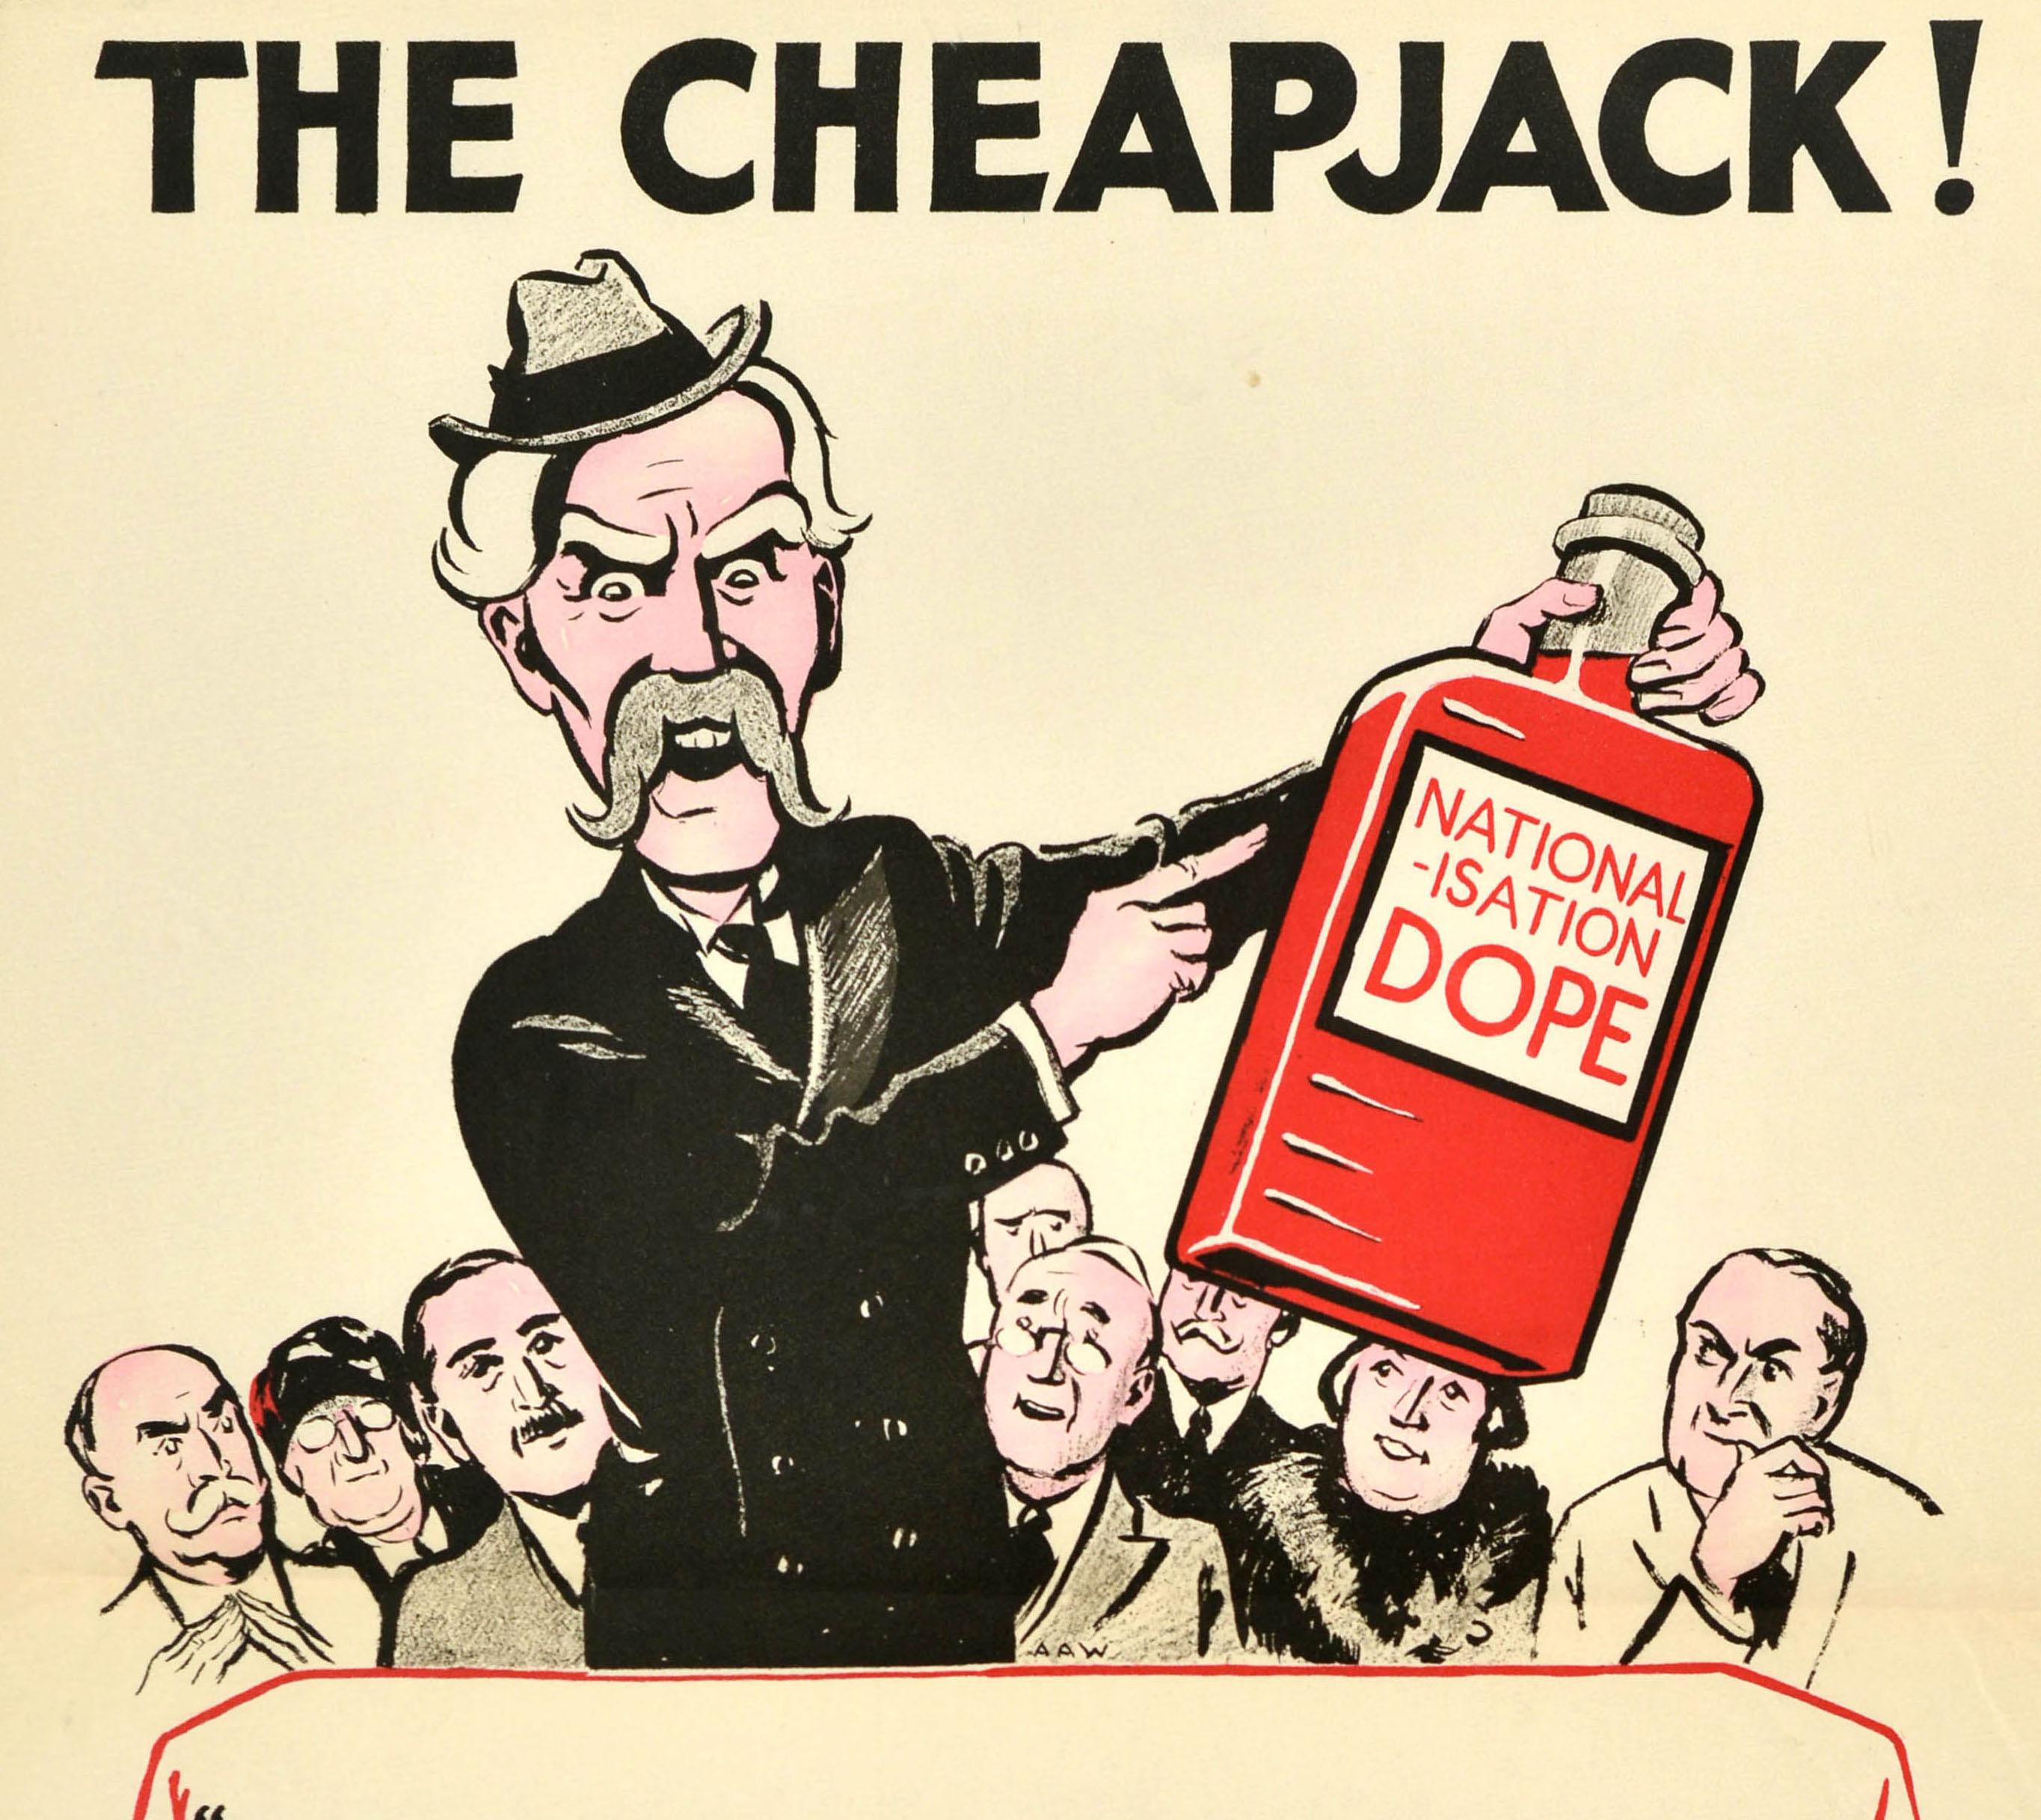 Original vintage political propaganda poster - The Cheapjack! Walk up, Walk up, Ladies & Gentlemen! Try my Marvellous Socialist Cure-all for Bad trade Swollen unemployment Broken time Agricultural depression Removes superfluous cash while you wait